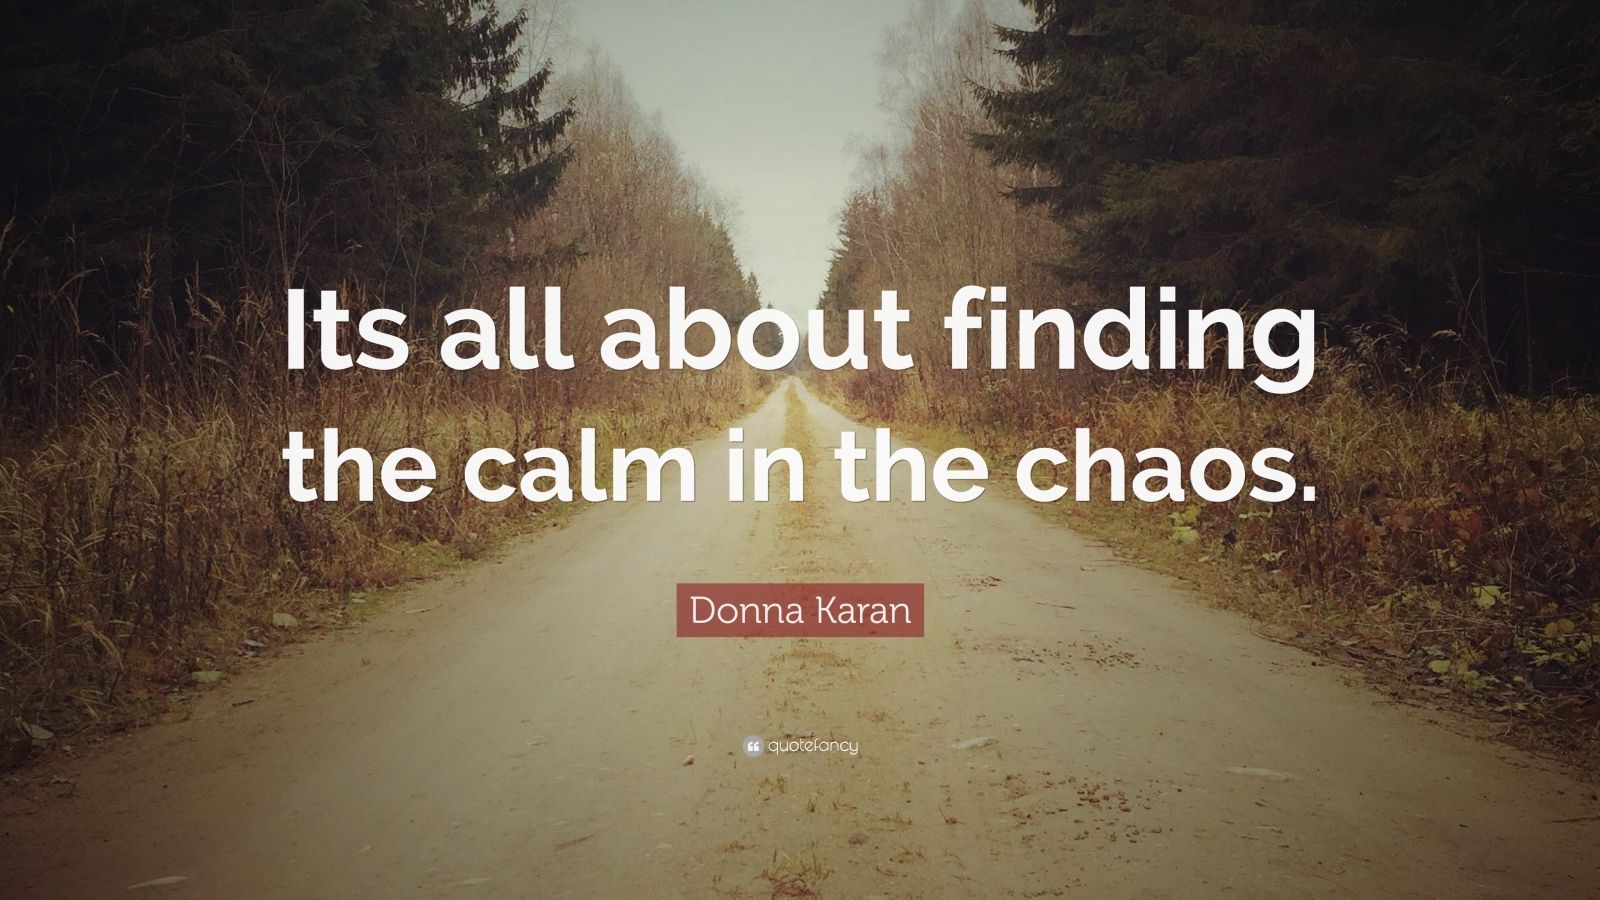 Donna Karan Quote “Its all about finding the calm in the